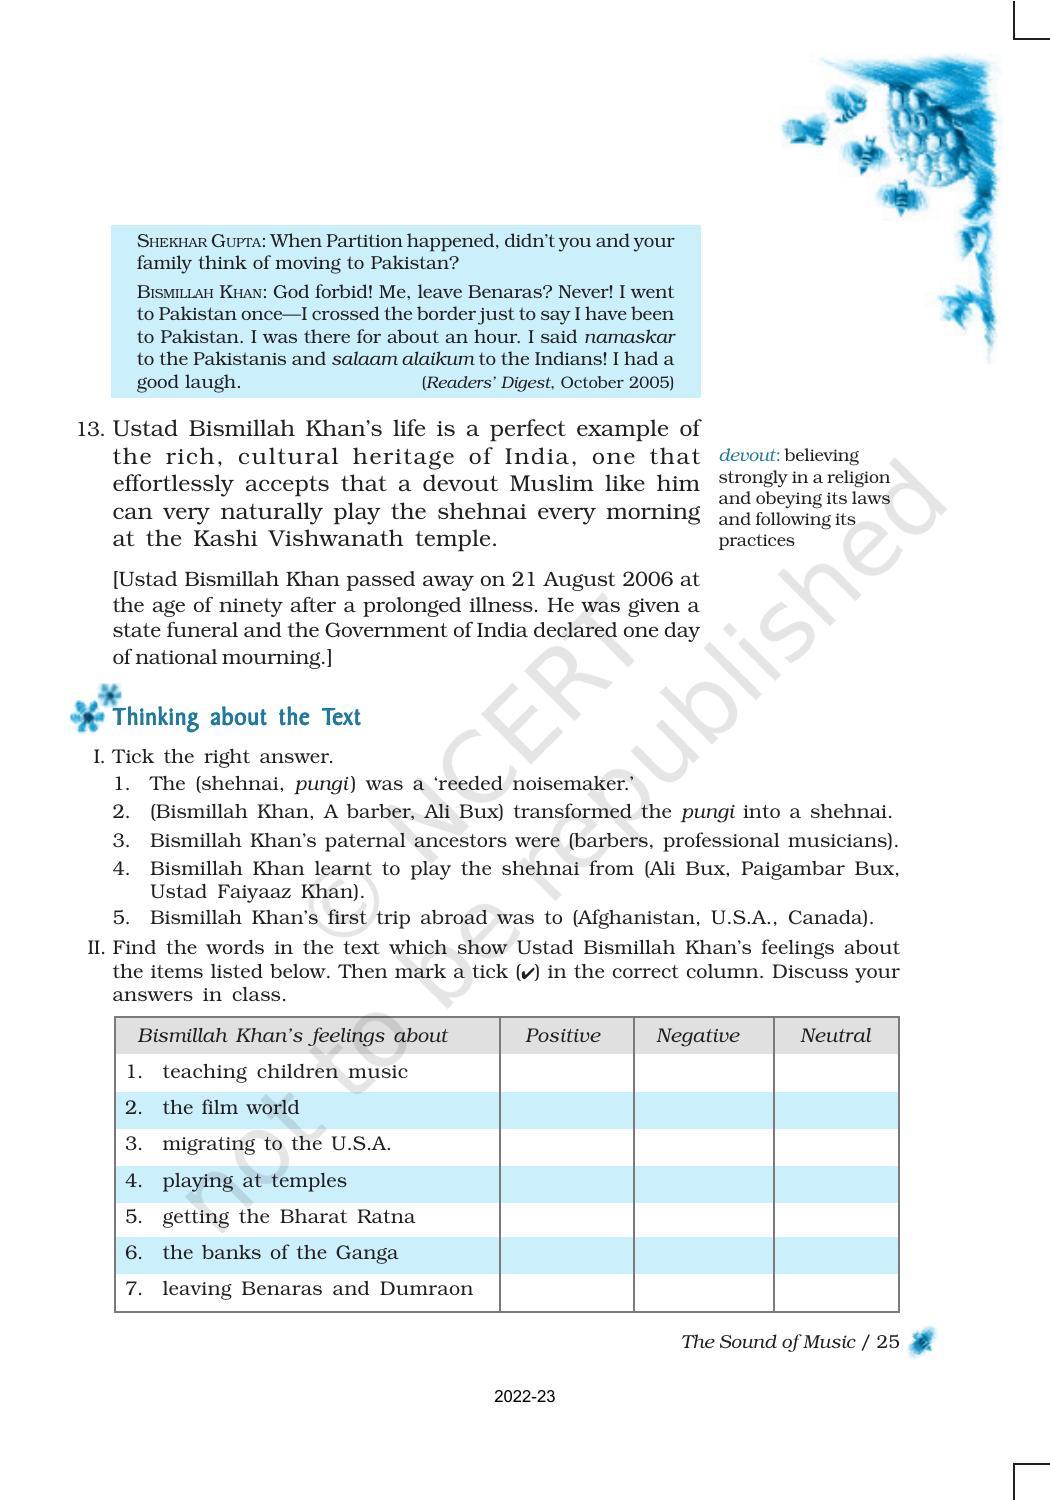 NCERT Book for Class 9 English Chapter 2 The Sound of Music - Page 9